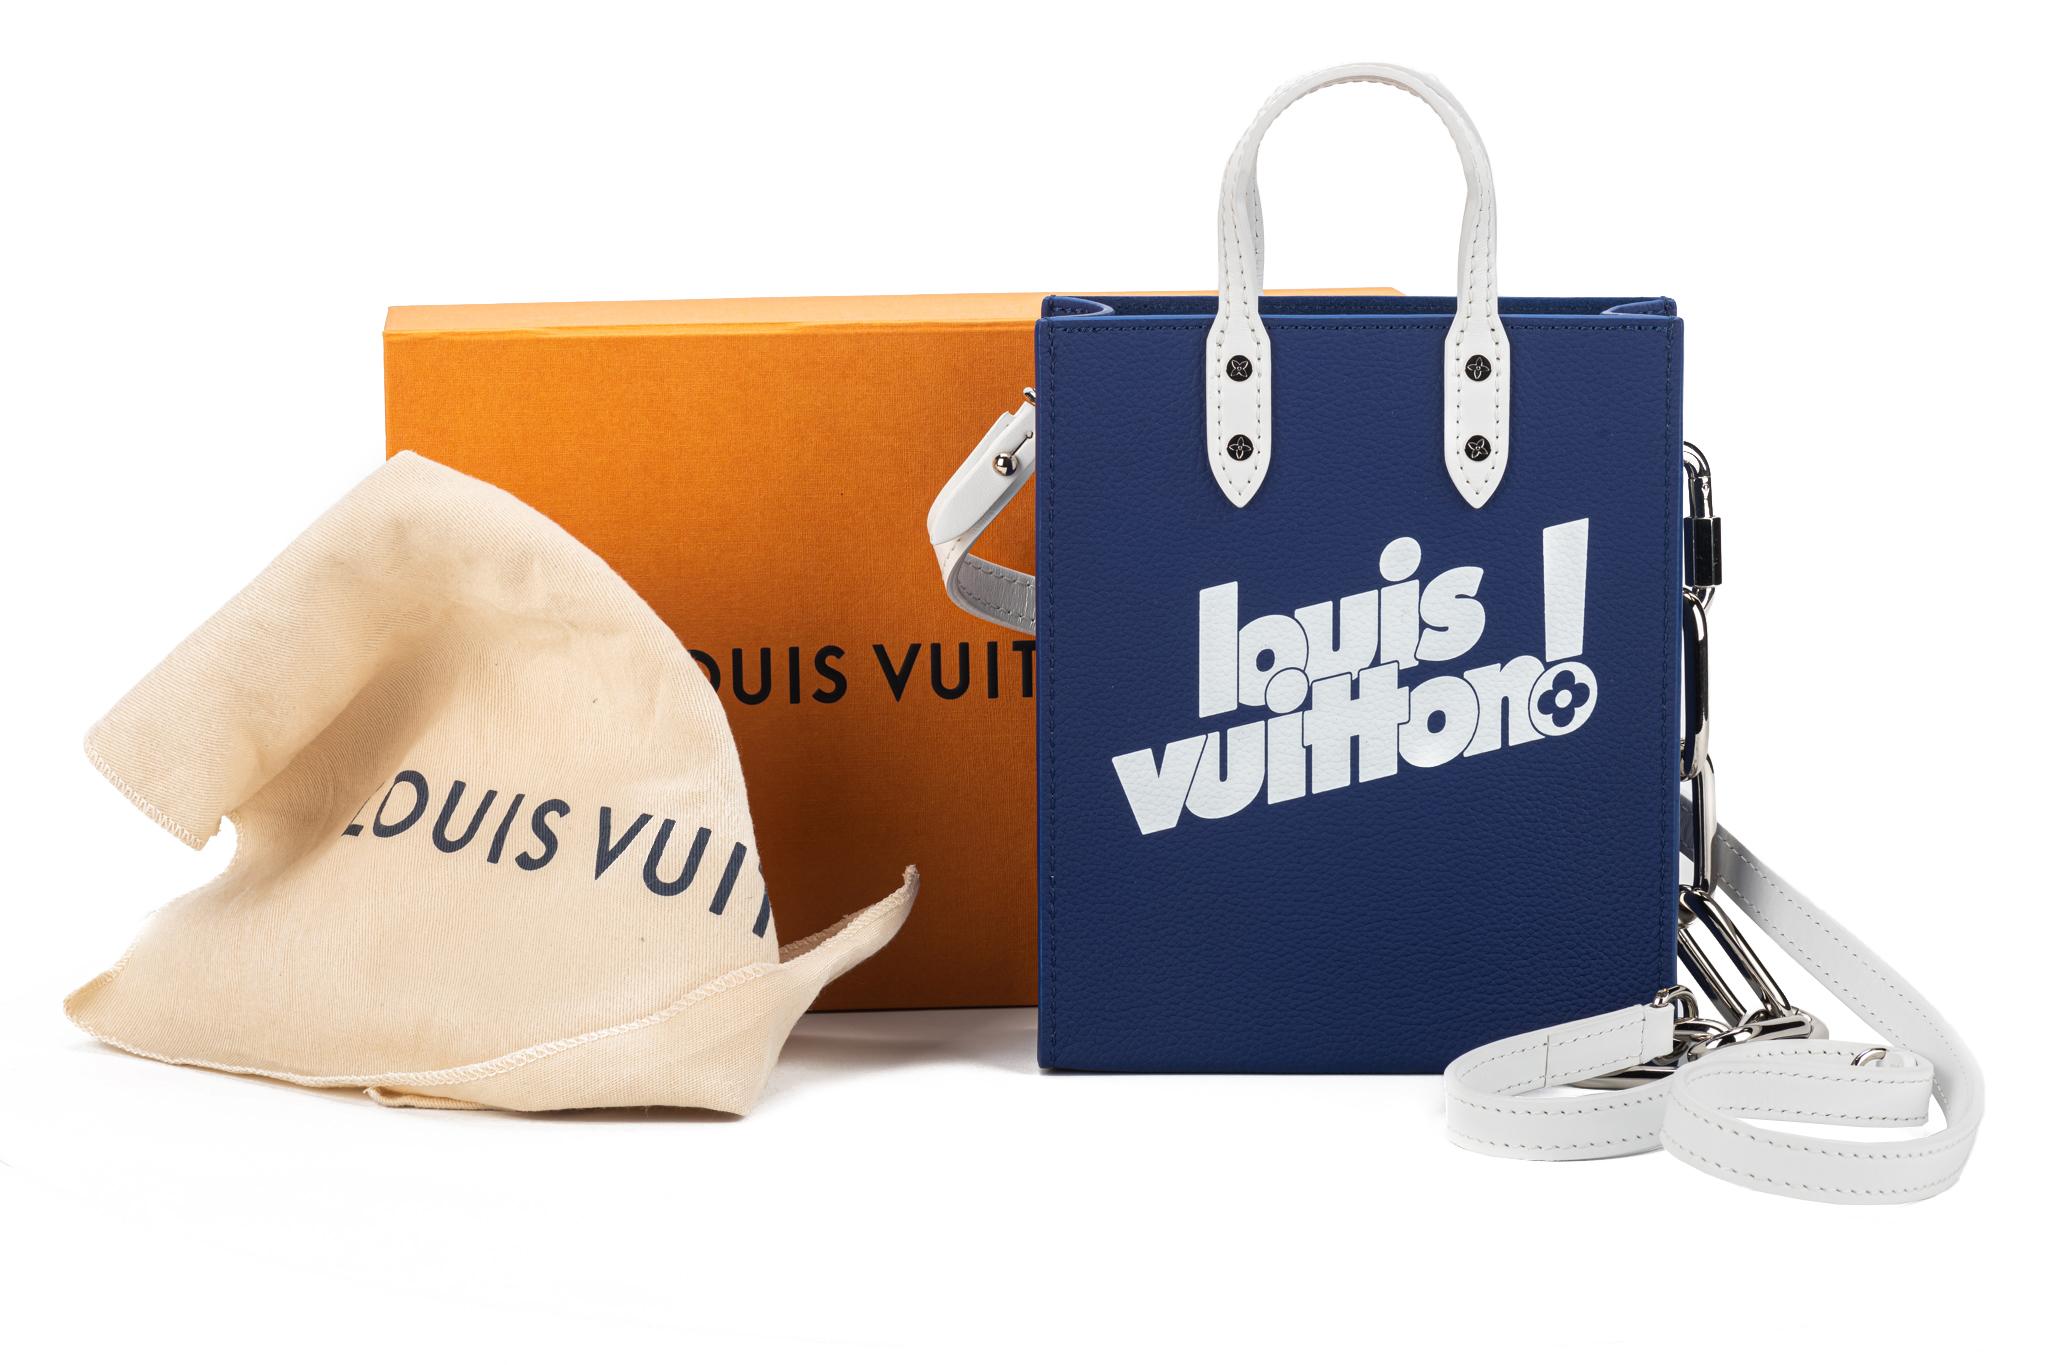 Louis Vuitton Virgil Abloh Blue Cowhide Everyday LV Sac Plat XS Silver Hardware from 2021. The bag is lined with tonal microfiber and includes a shoulder strap. The item is new and comes with the dustcover and box.